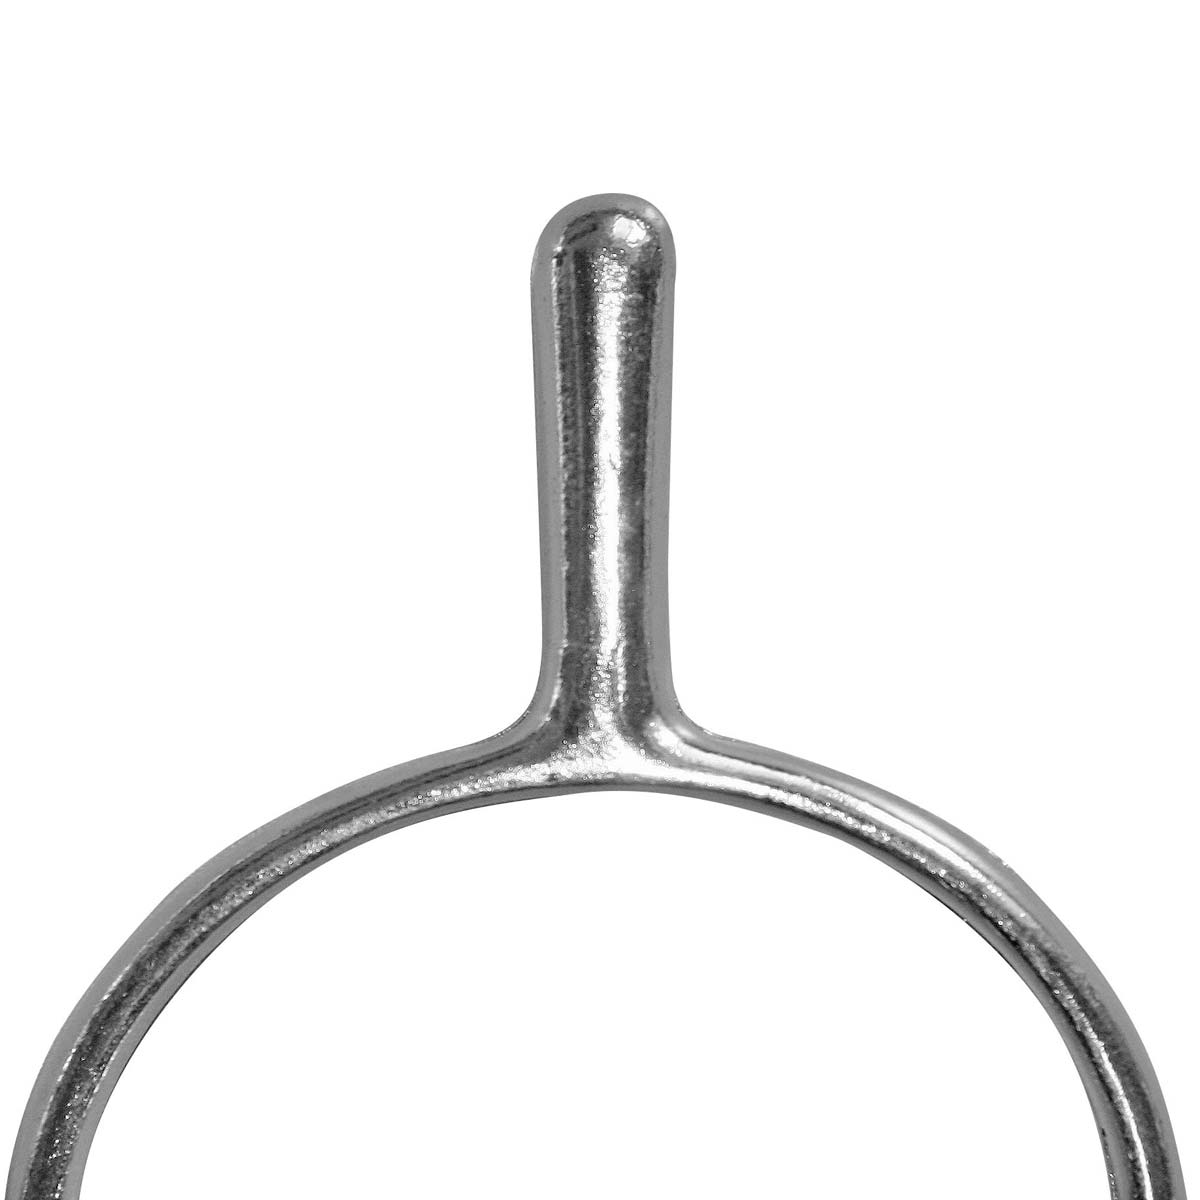 Covalliero spurs ball with straps for men